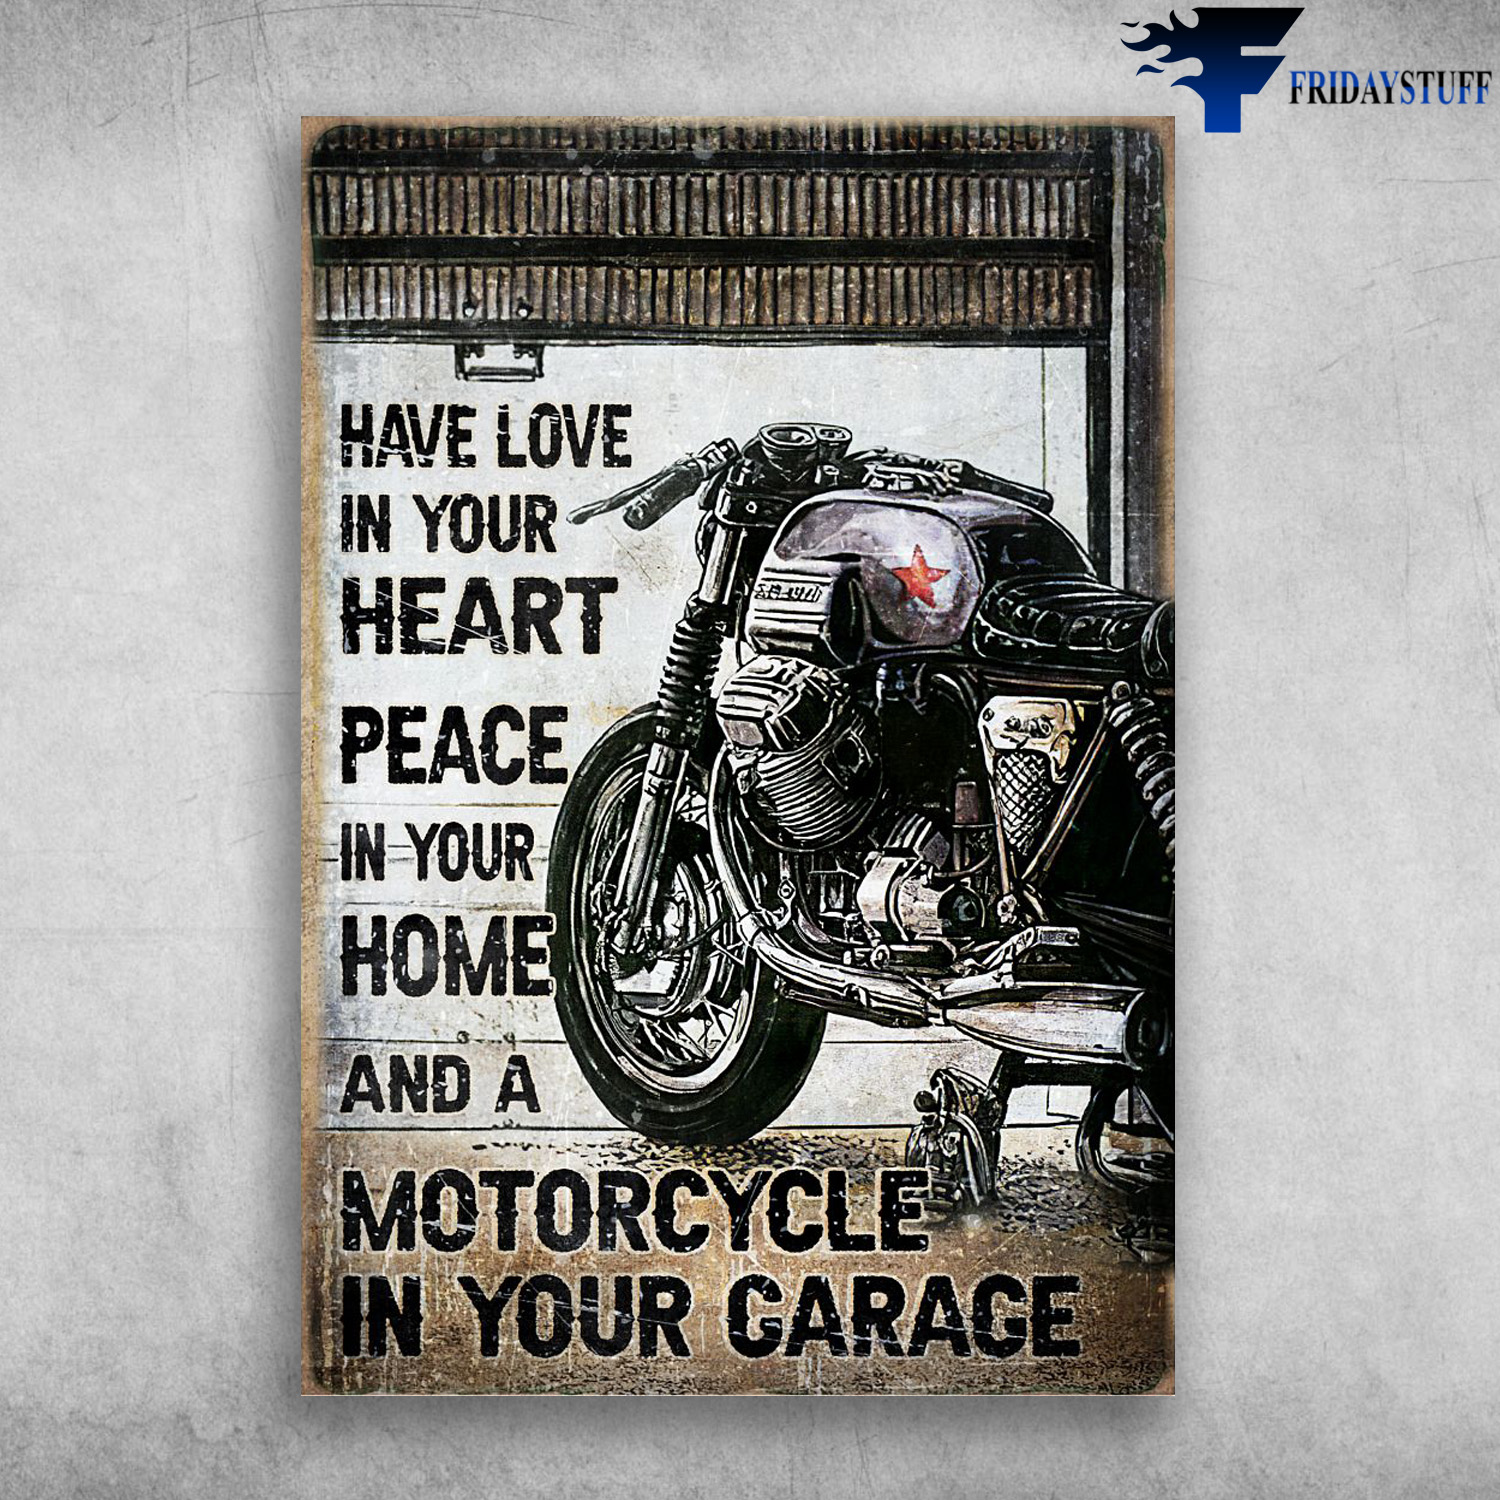 Motorcyle In The Garage - Have Love In Your Heart, Peace In Your Home, And A Motorcycle In Your Garage